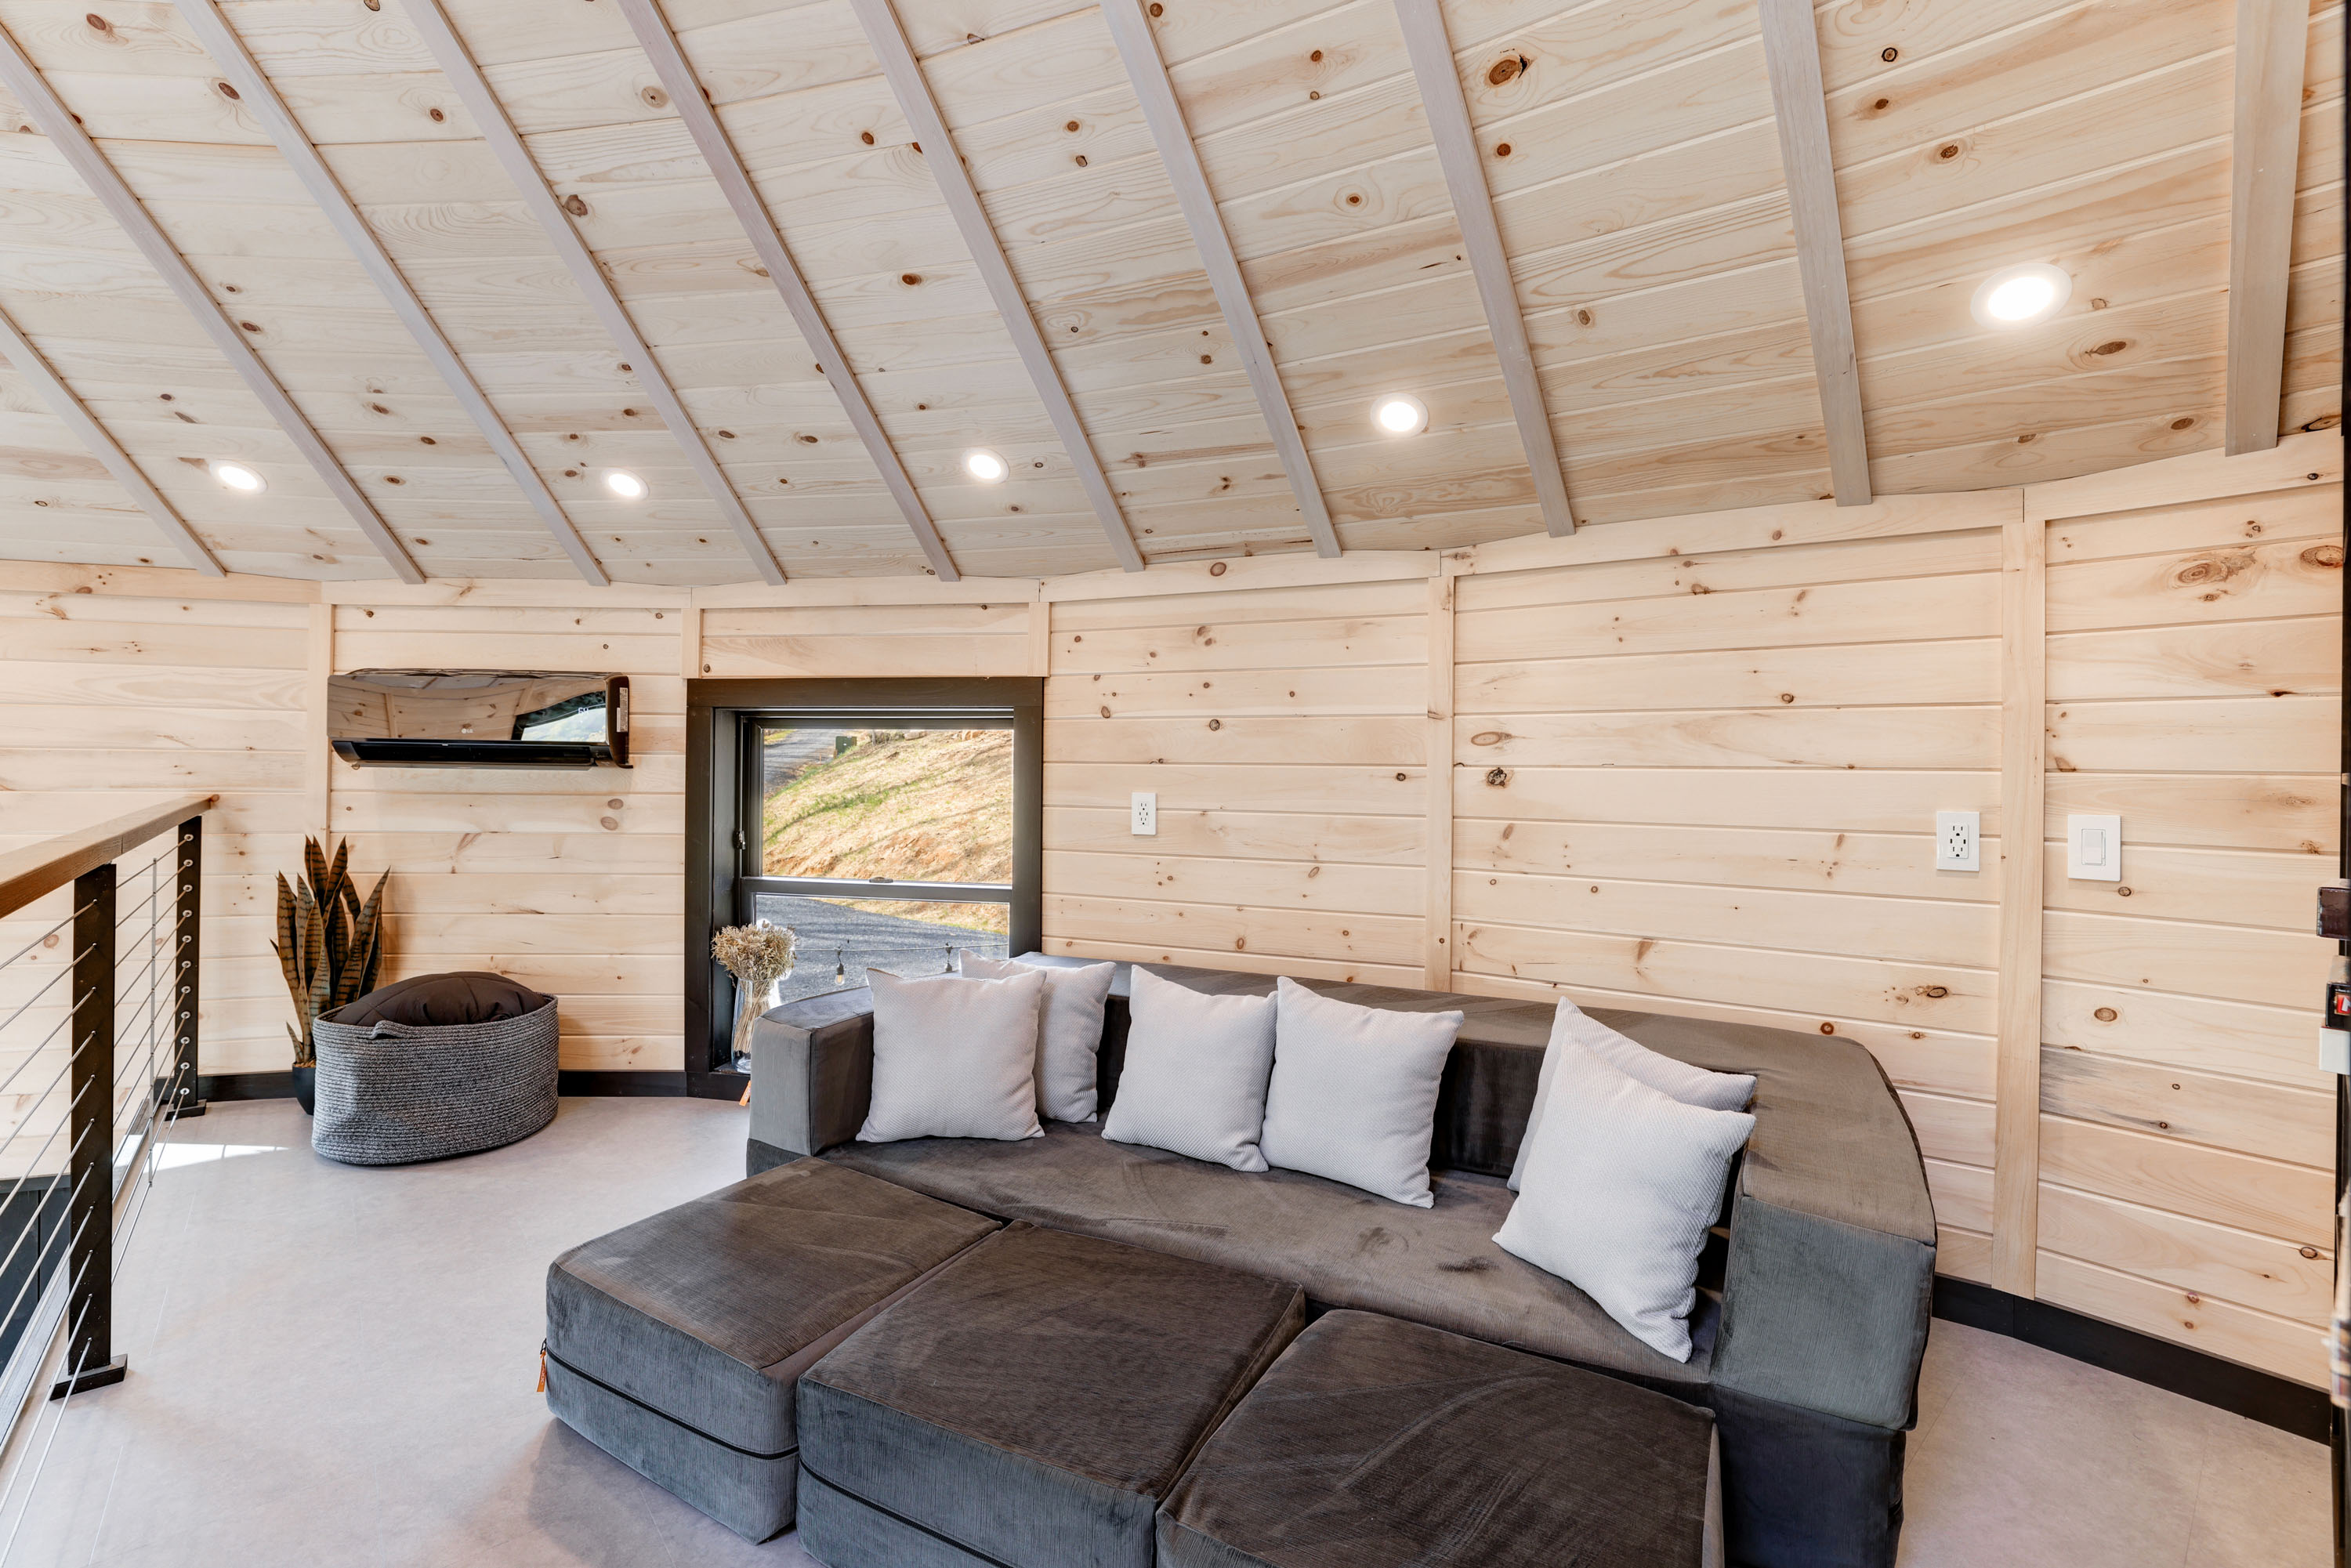 <span  class="uc_style_uc_tiles_grid_image_elementor_uc_items_attribute_title" style="color:#ffffff;">King-Size Sleeper Sofa in Climate-Controlled Loft - Skyline Yurt</span>